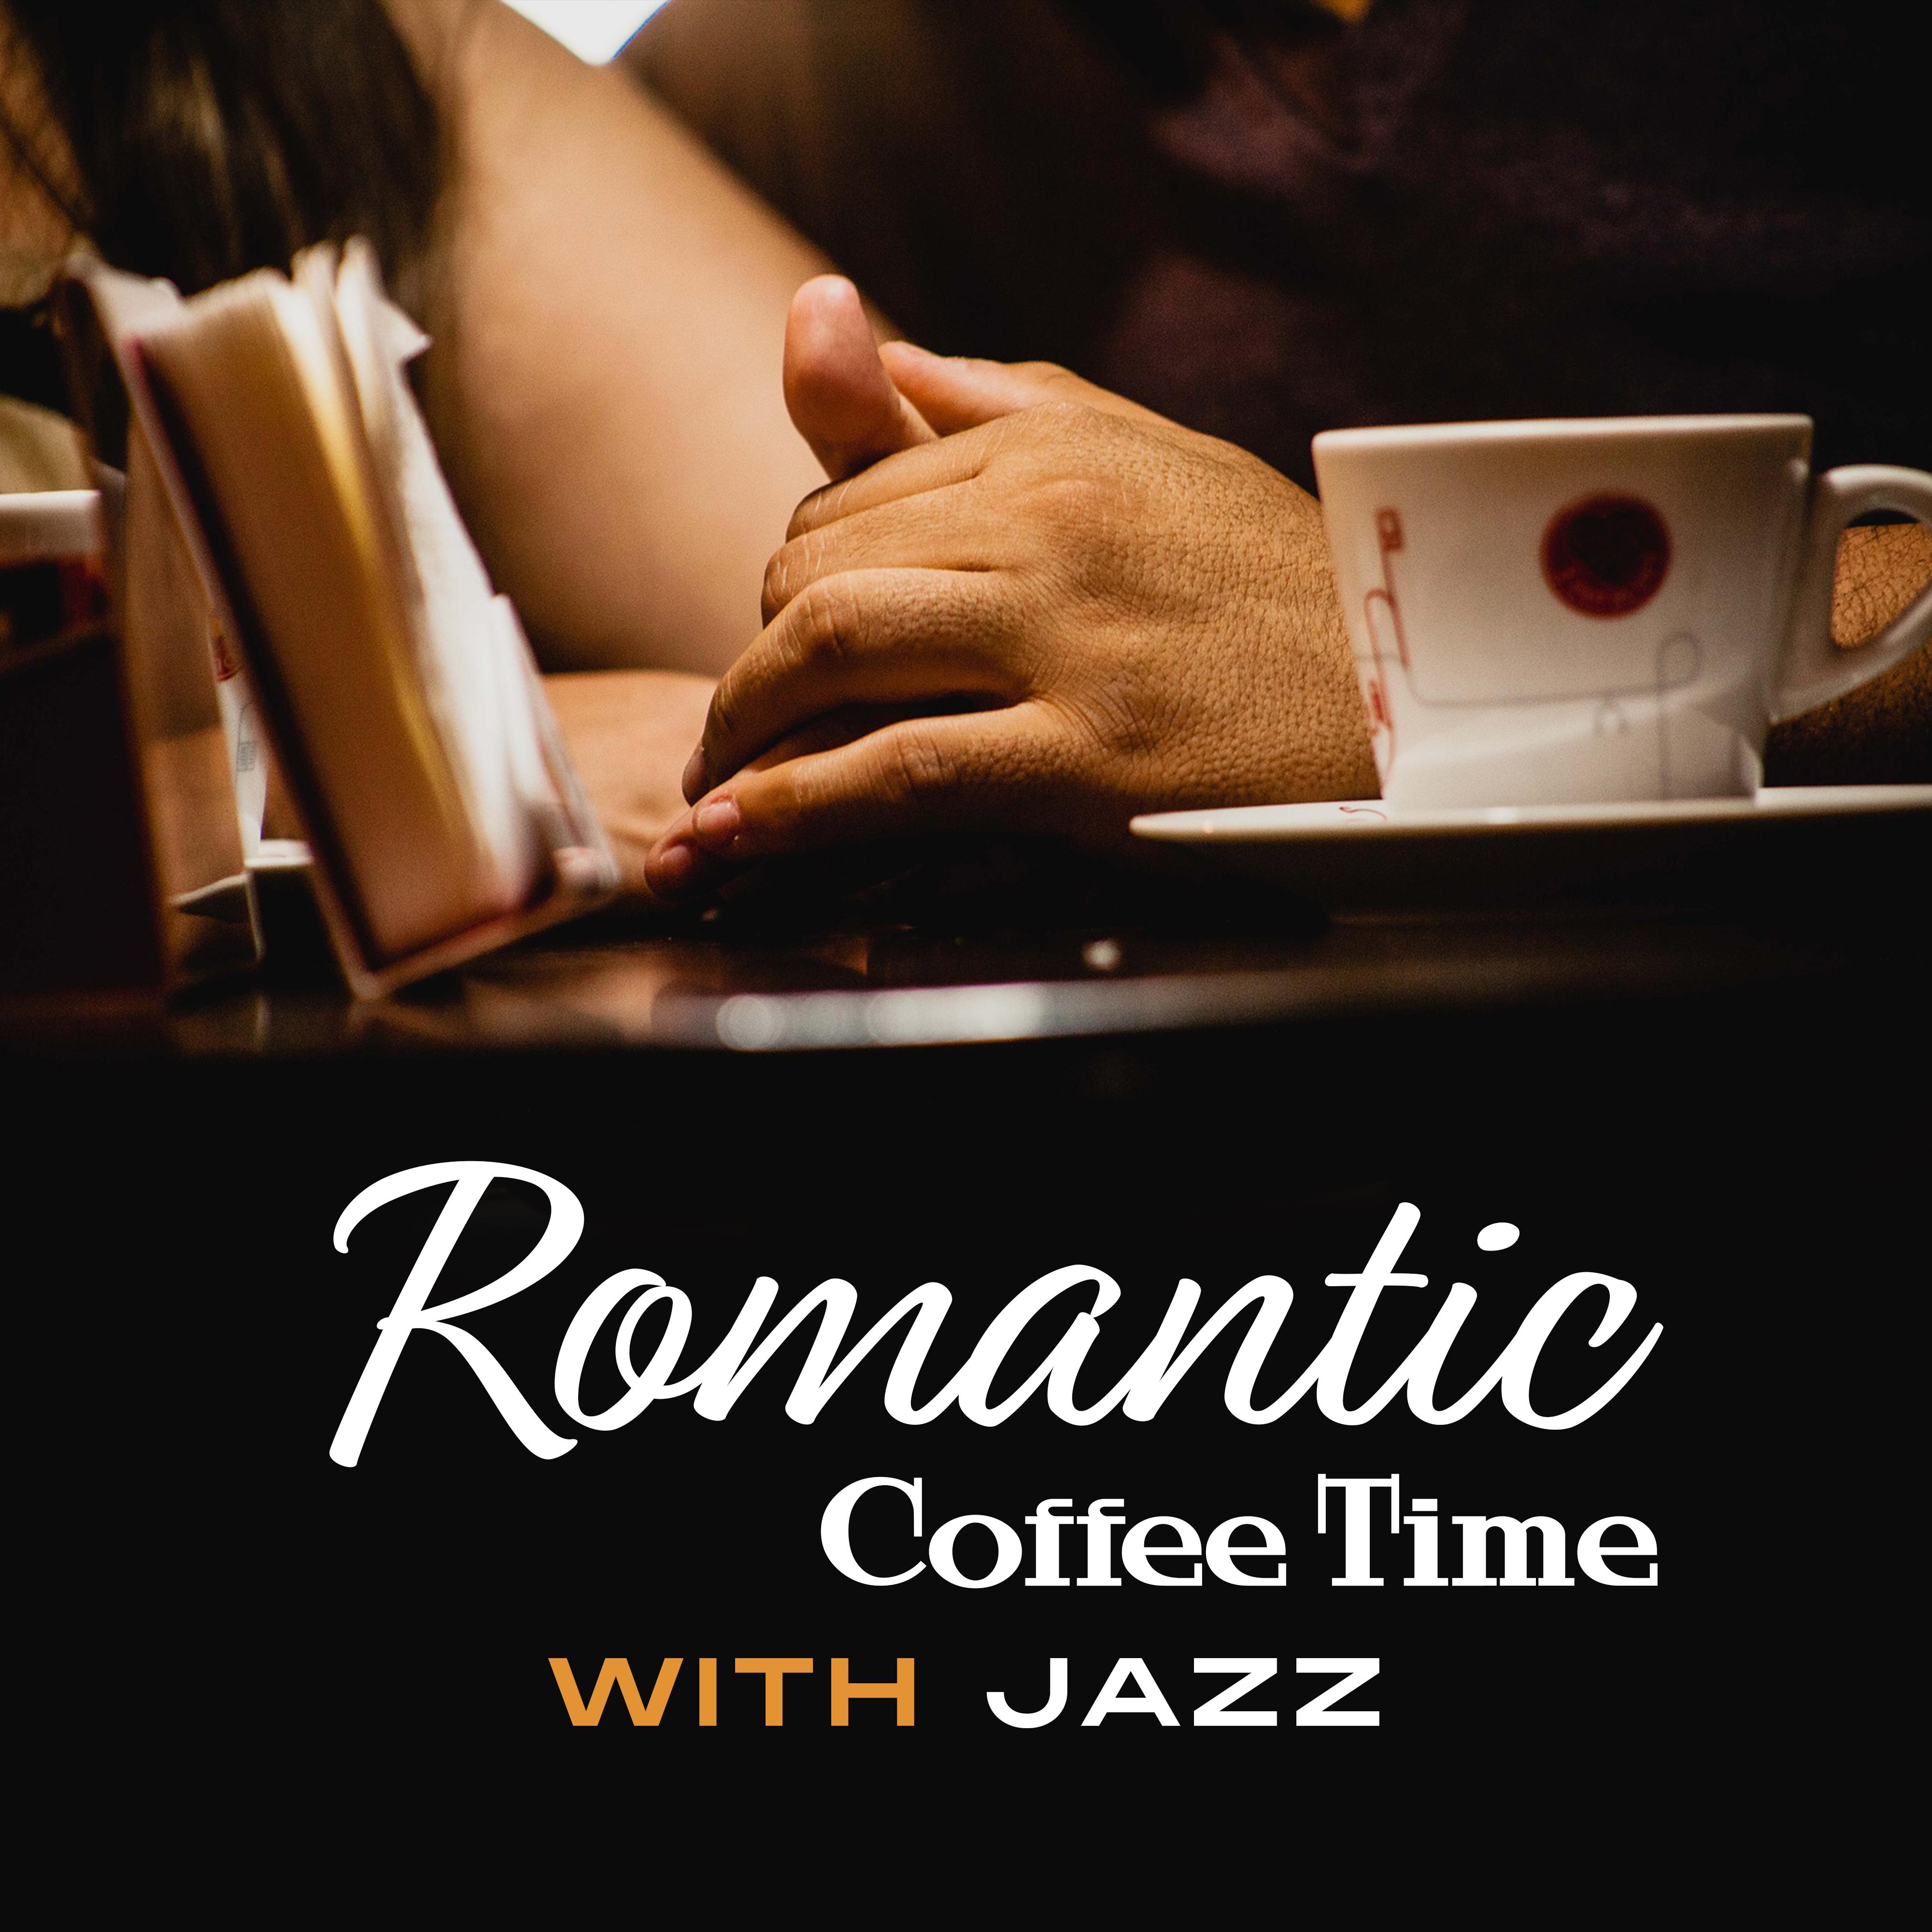 Romantic Coffee Time with Jazz